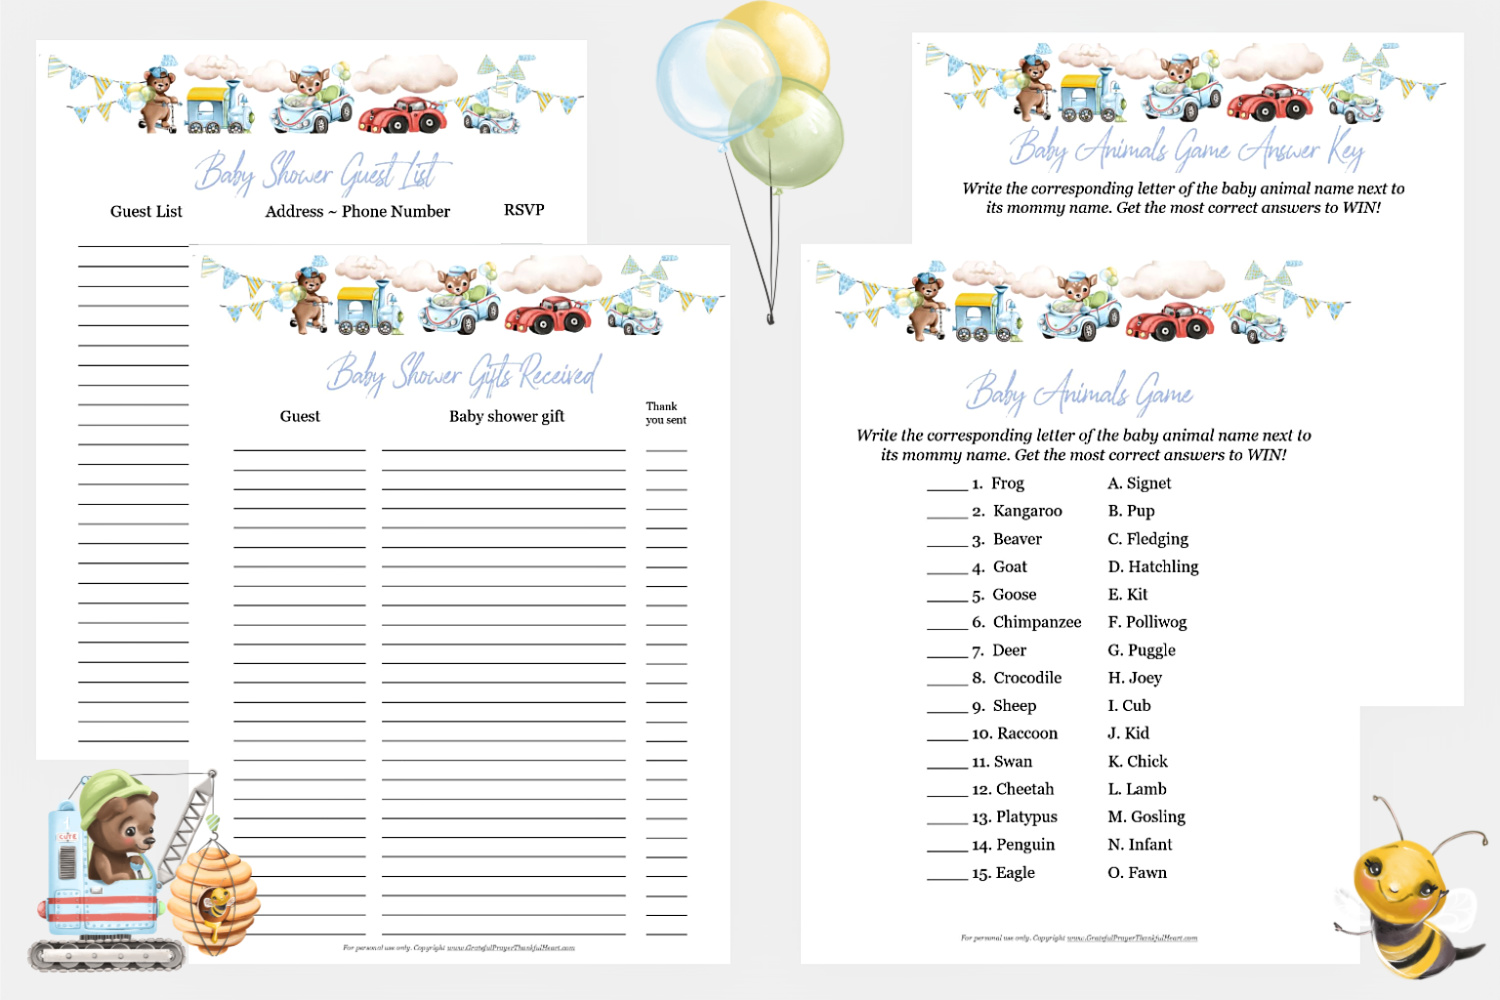 Traditional or virtual baby shower planner with invitations, games, decorations, food menu and recipes. Lists, guides for an easy & beautiful event!